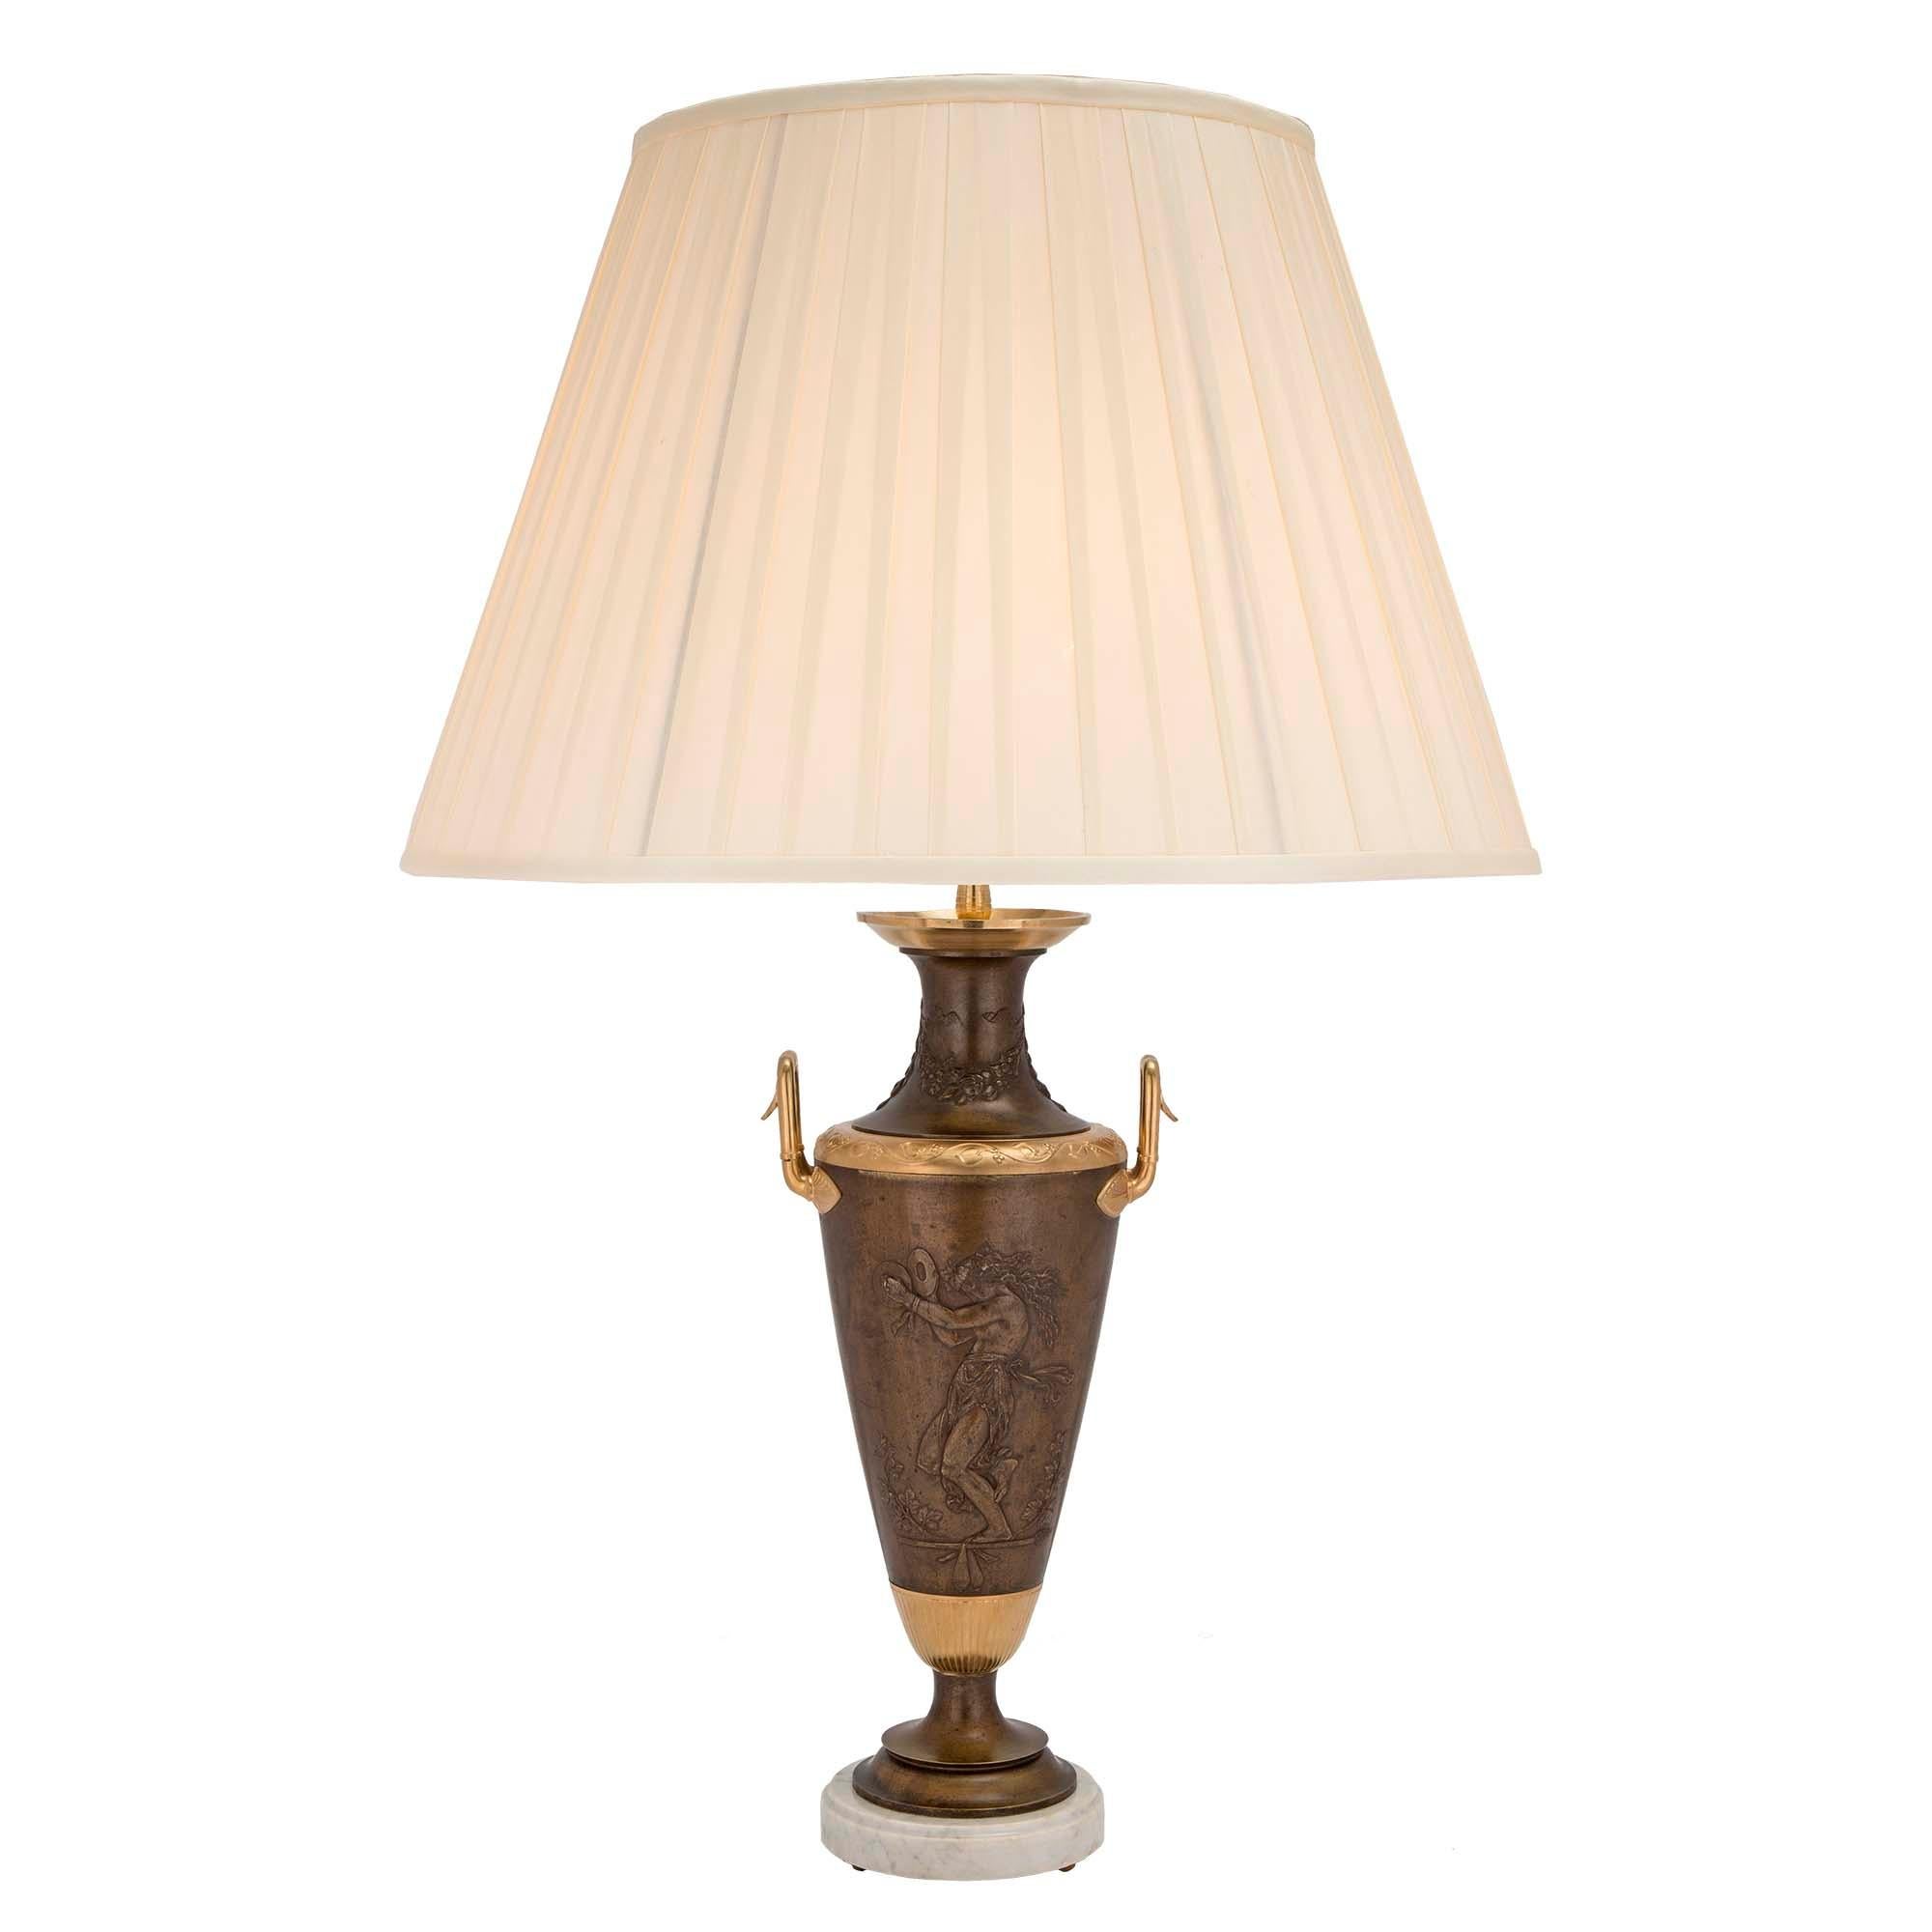 Neoclassical French 19th Century Neo-Classical St. Patinated Bronze and Ormolu Lamp For Sale